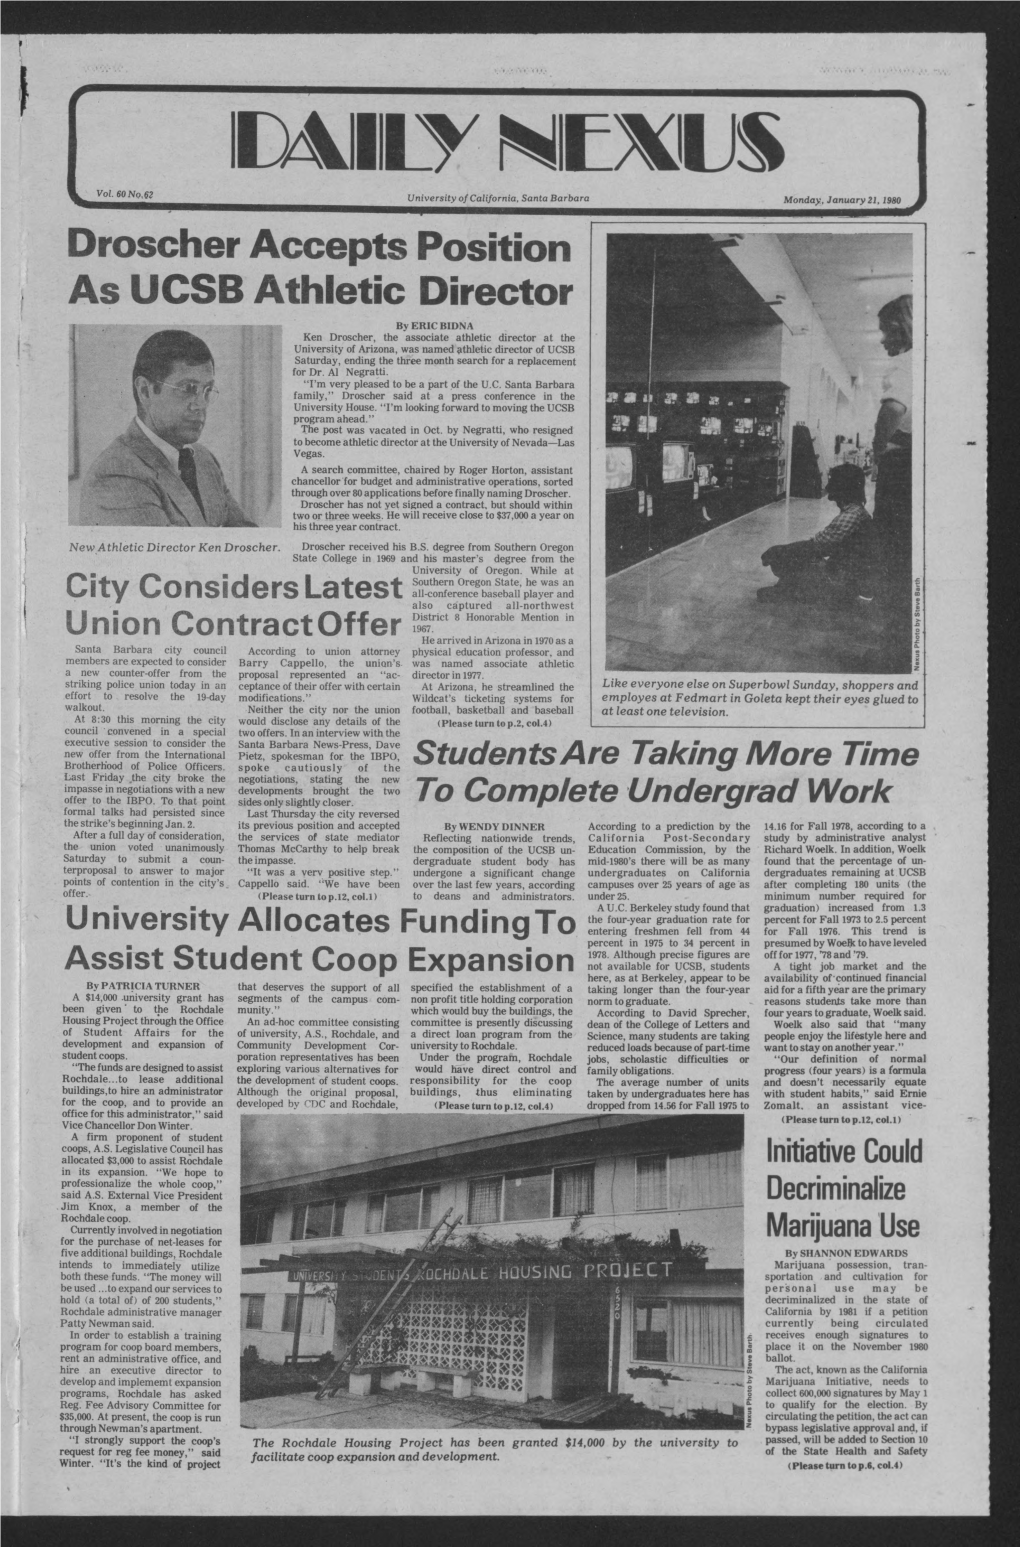 Droscher Accepts Position As UCSB Athletic Director